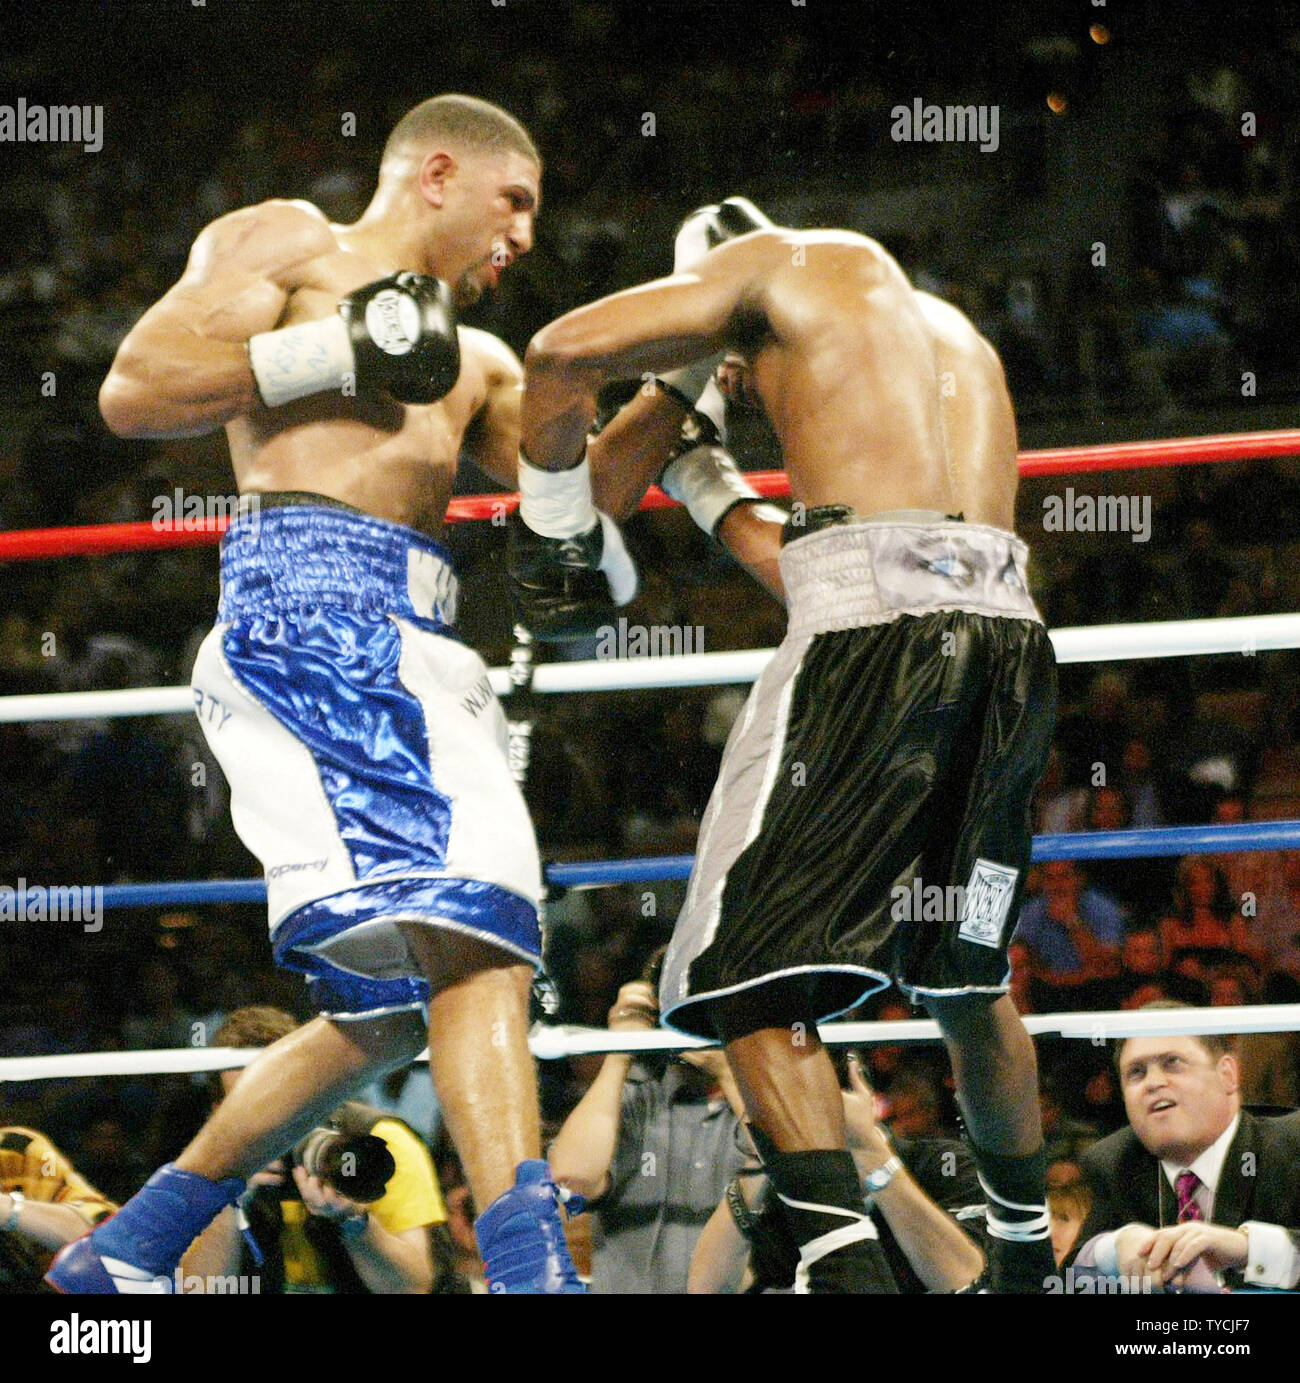 Winky Wright of St. Petersburg FL (right) consolidated the 154 pound titles to become undisputed champion with a decision over Sugar Shane Mosley at Mandalay Bay, March 13, 2004. (UPI Photo/Roger Williams) Stock Photo